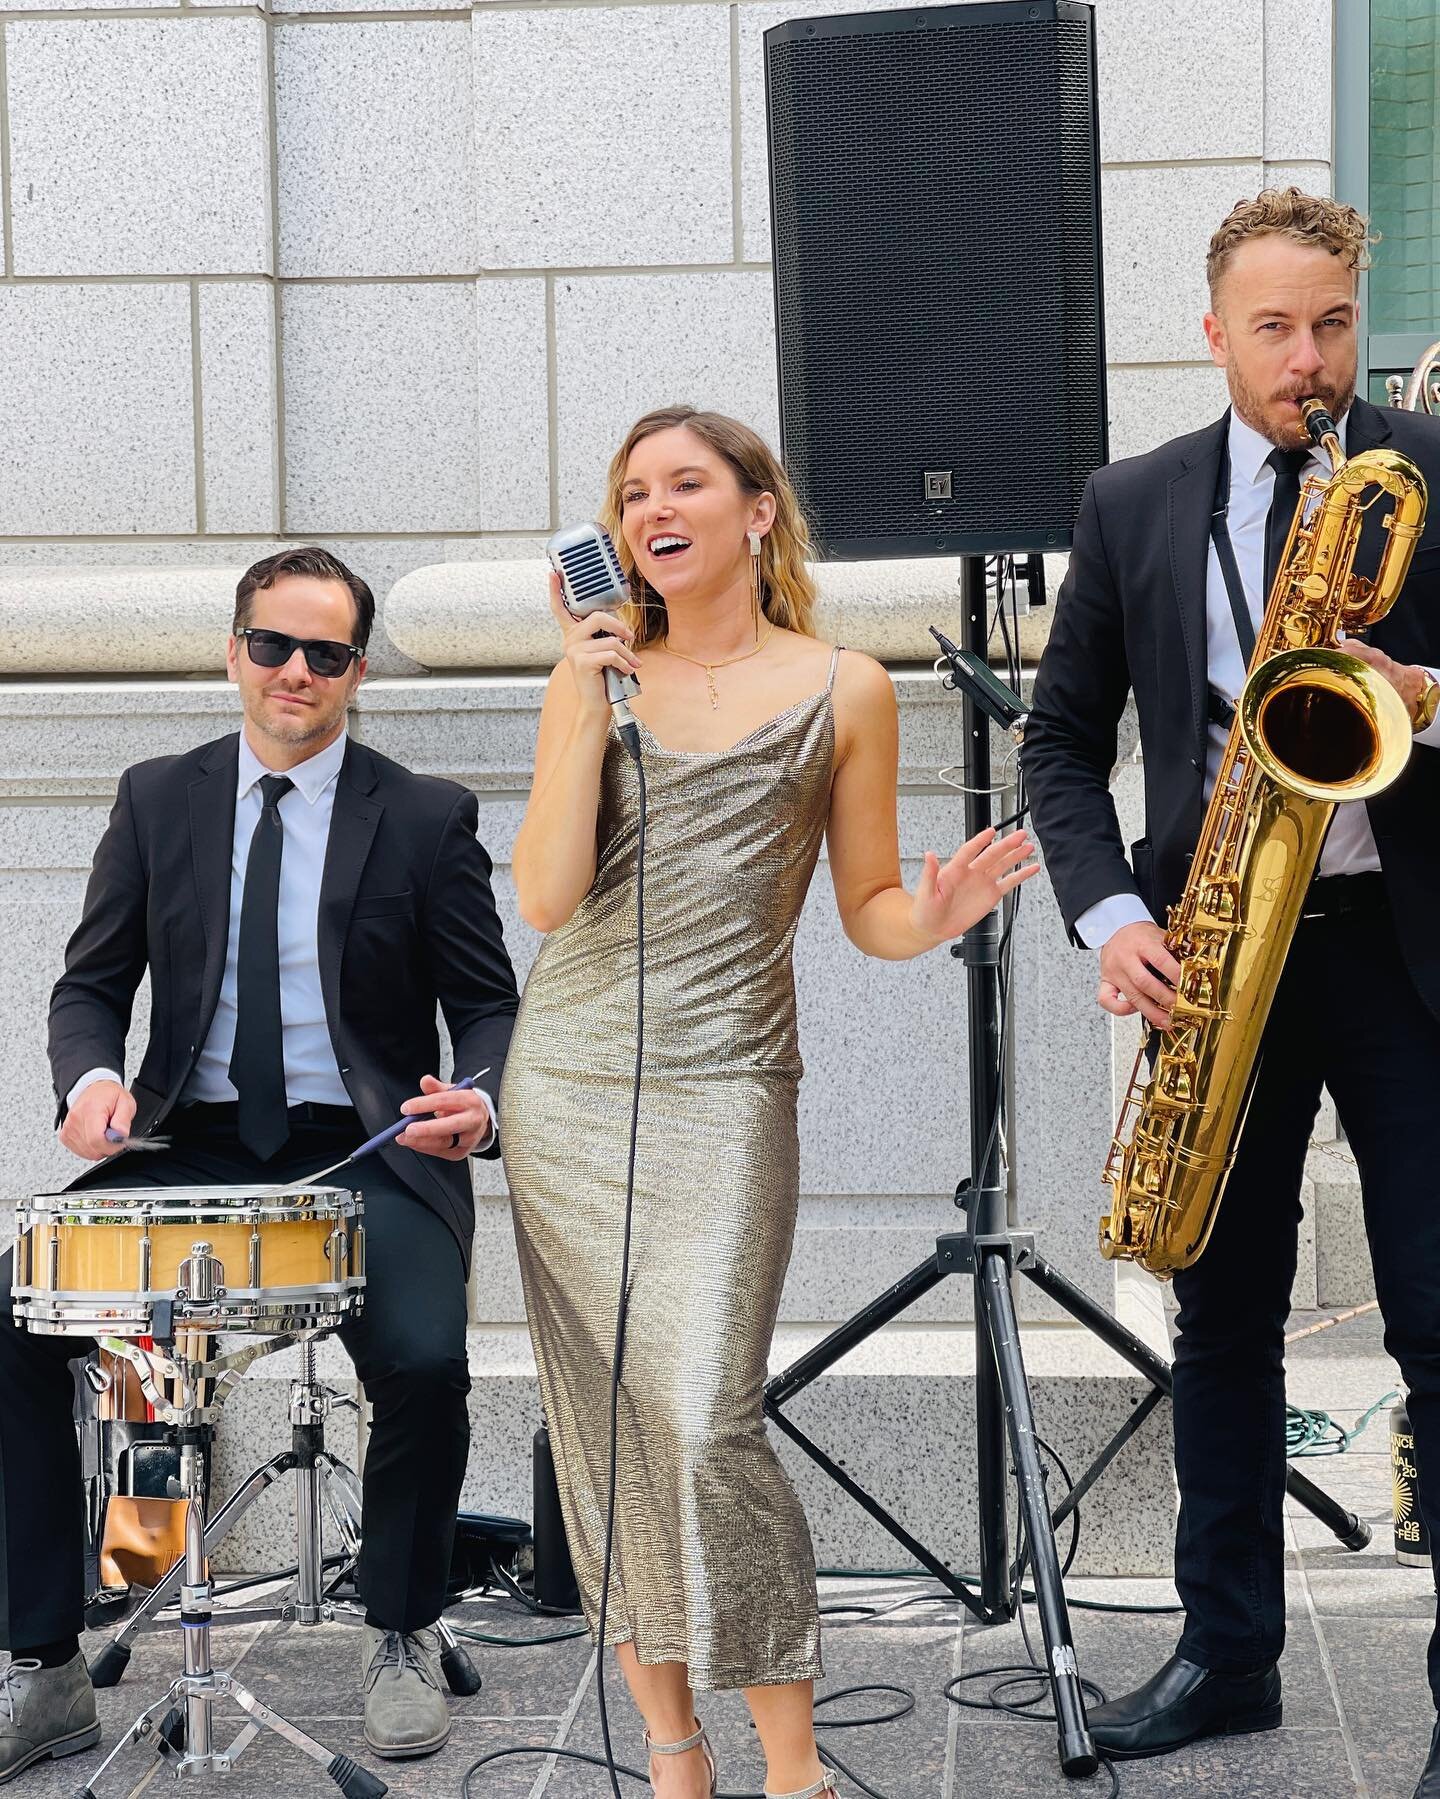 A jazzy cocktail hour with Gold Standard is the perfect way to get your guests in the swing for a fantastic evening! 🎷 Clink glasses to the classics over dinner and then we&rsquo;ll move them to the dance floor with our party set to send the night o